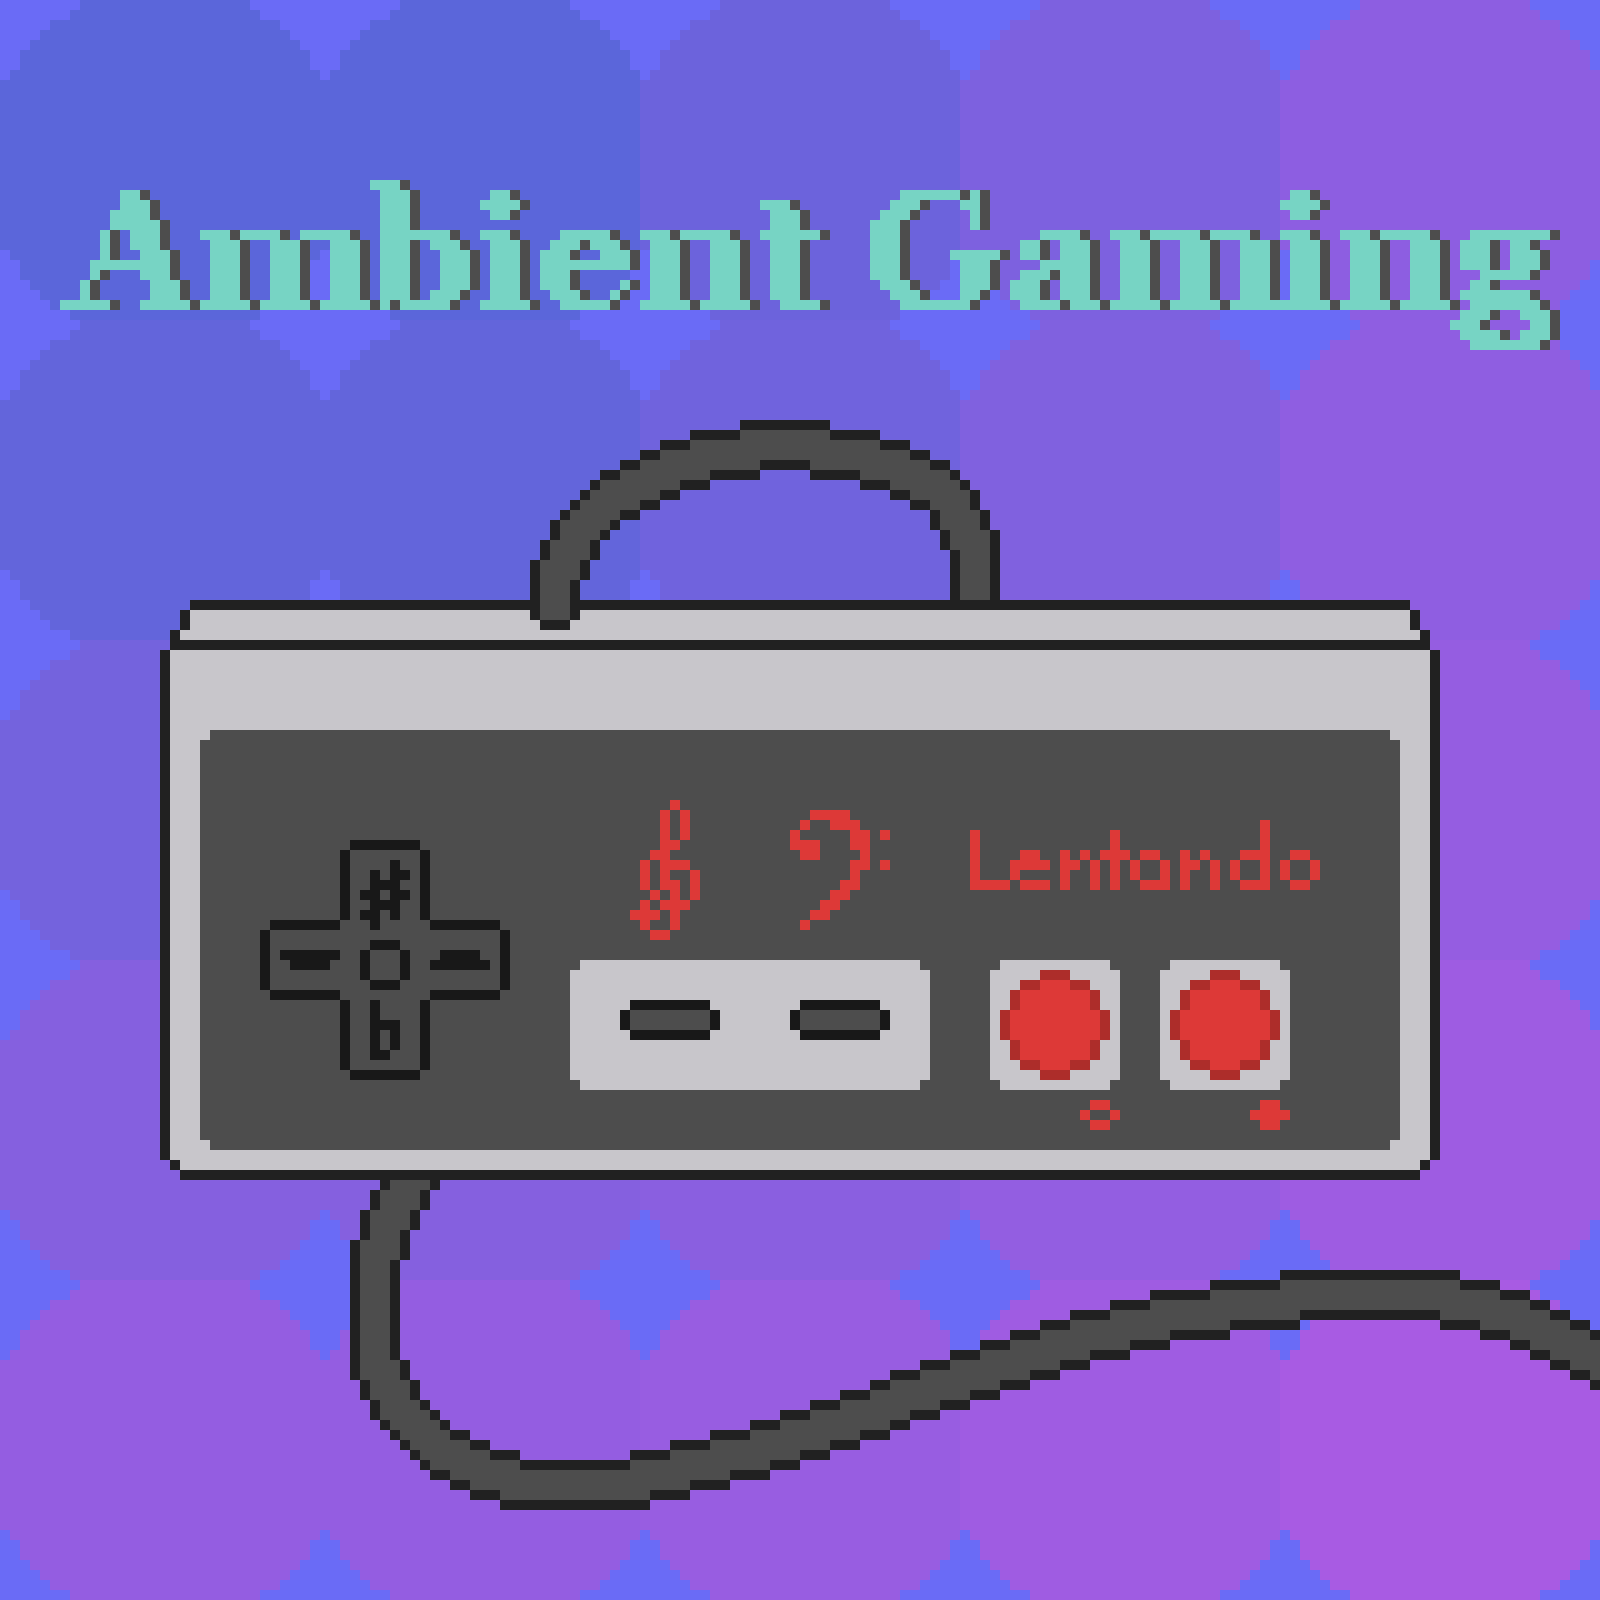 Pixel art playlist cover with a NES style controller that has music symbols replacing the button labels and the word 'Lentando' where the Nintendo logo should be. Light green text reads 'Ambient Gaming' at the top, with a blue to purple gradient with circles in the background.